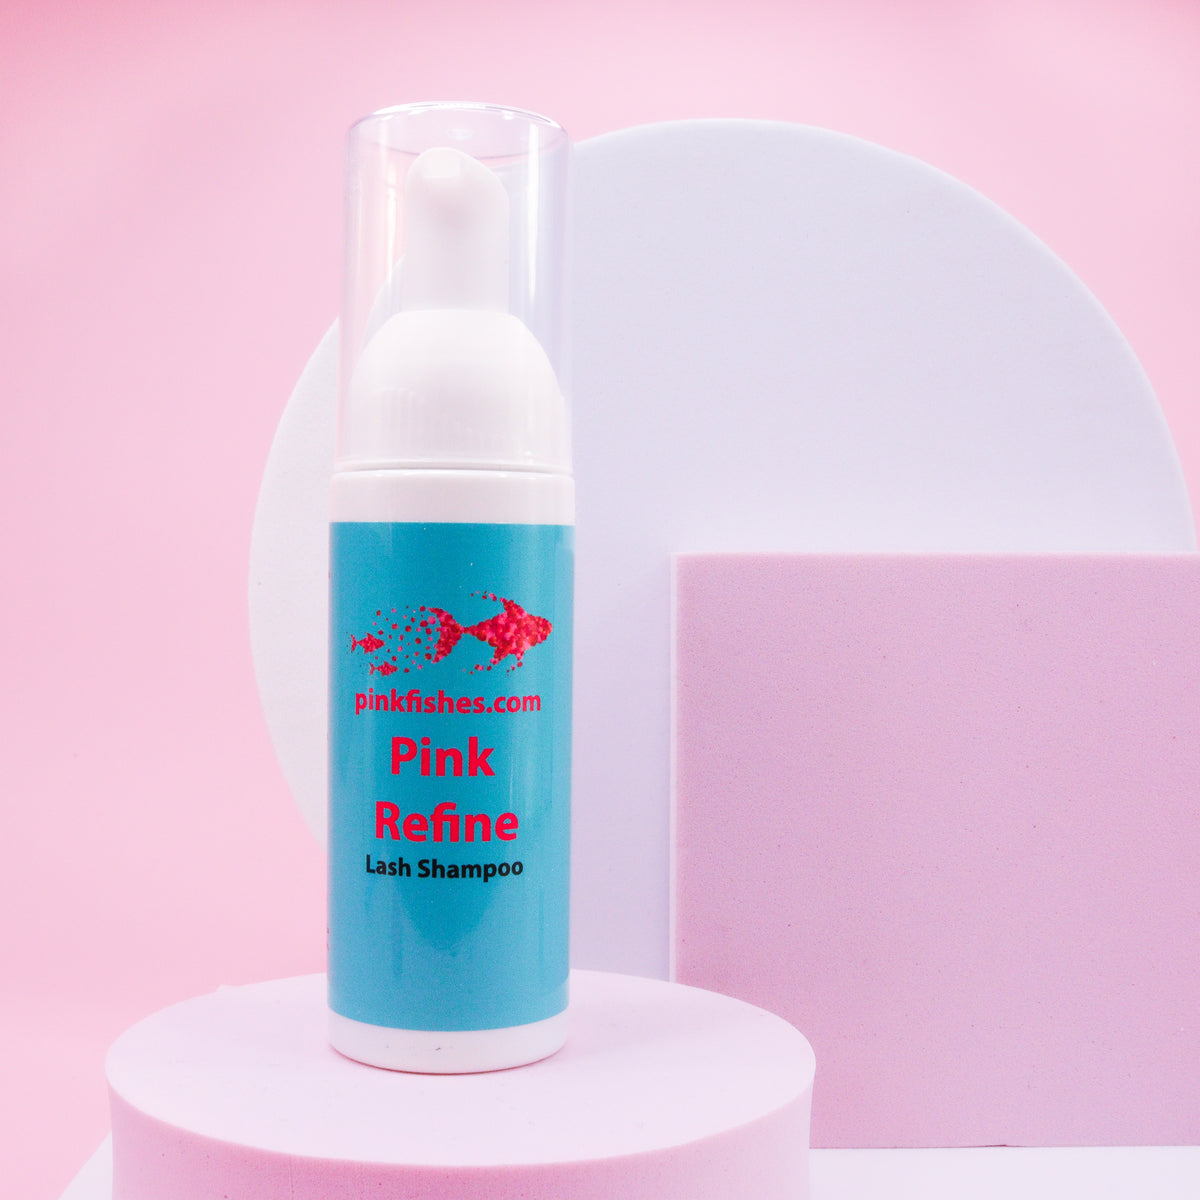 Pink Refine Lash Shampoo from Pinkfishes